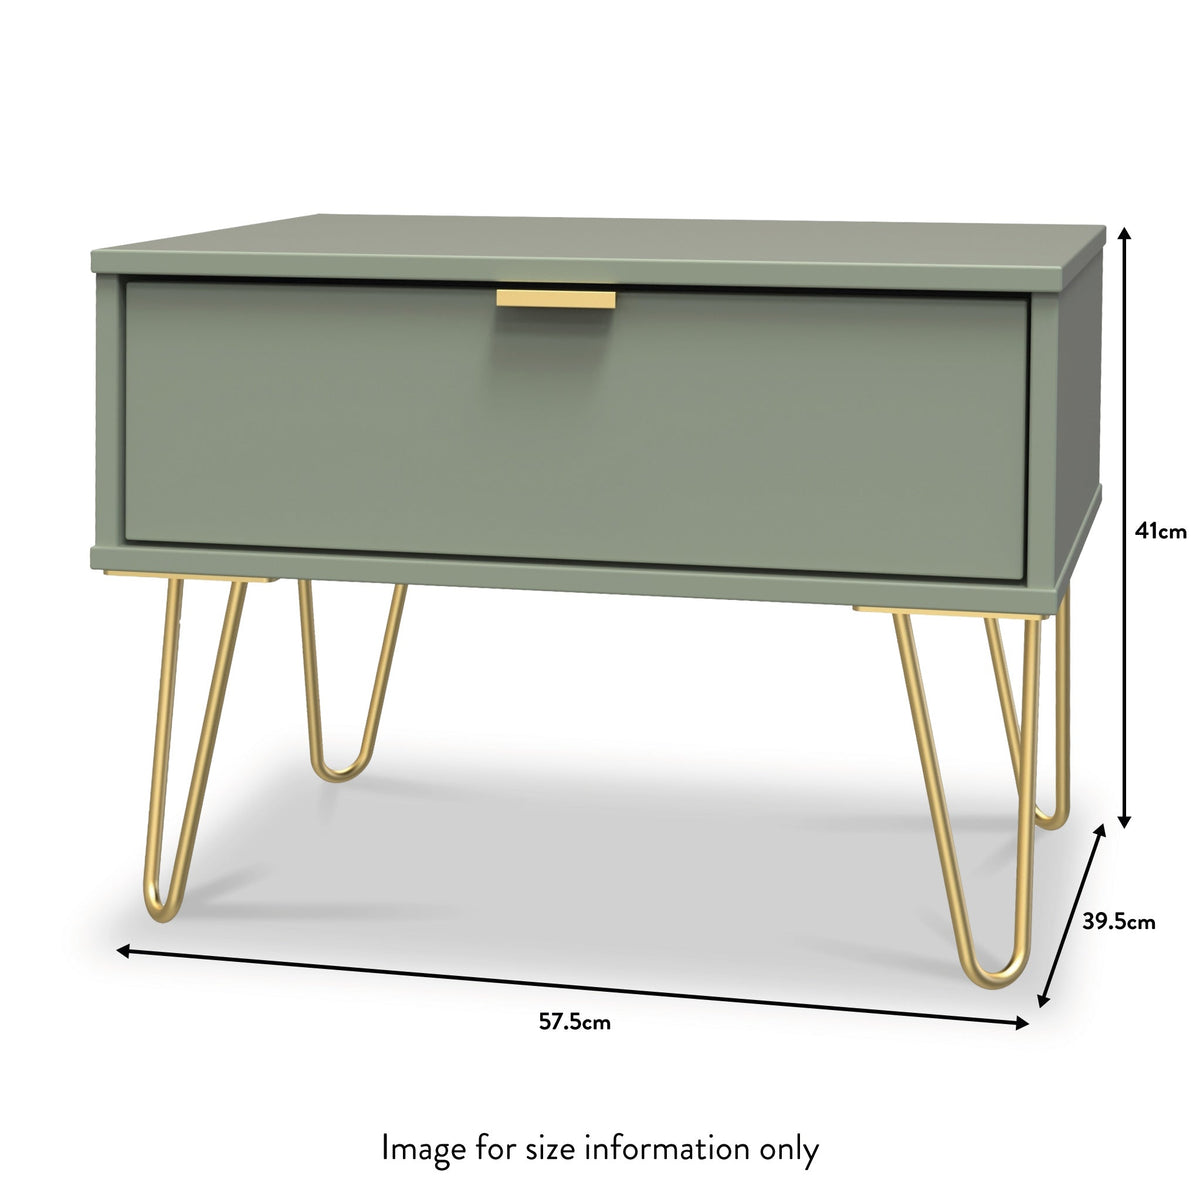 Moreno Olive Green 1 Drawer Sofa Side Lamp Table with Gold Hairpin Legs dimensions guide